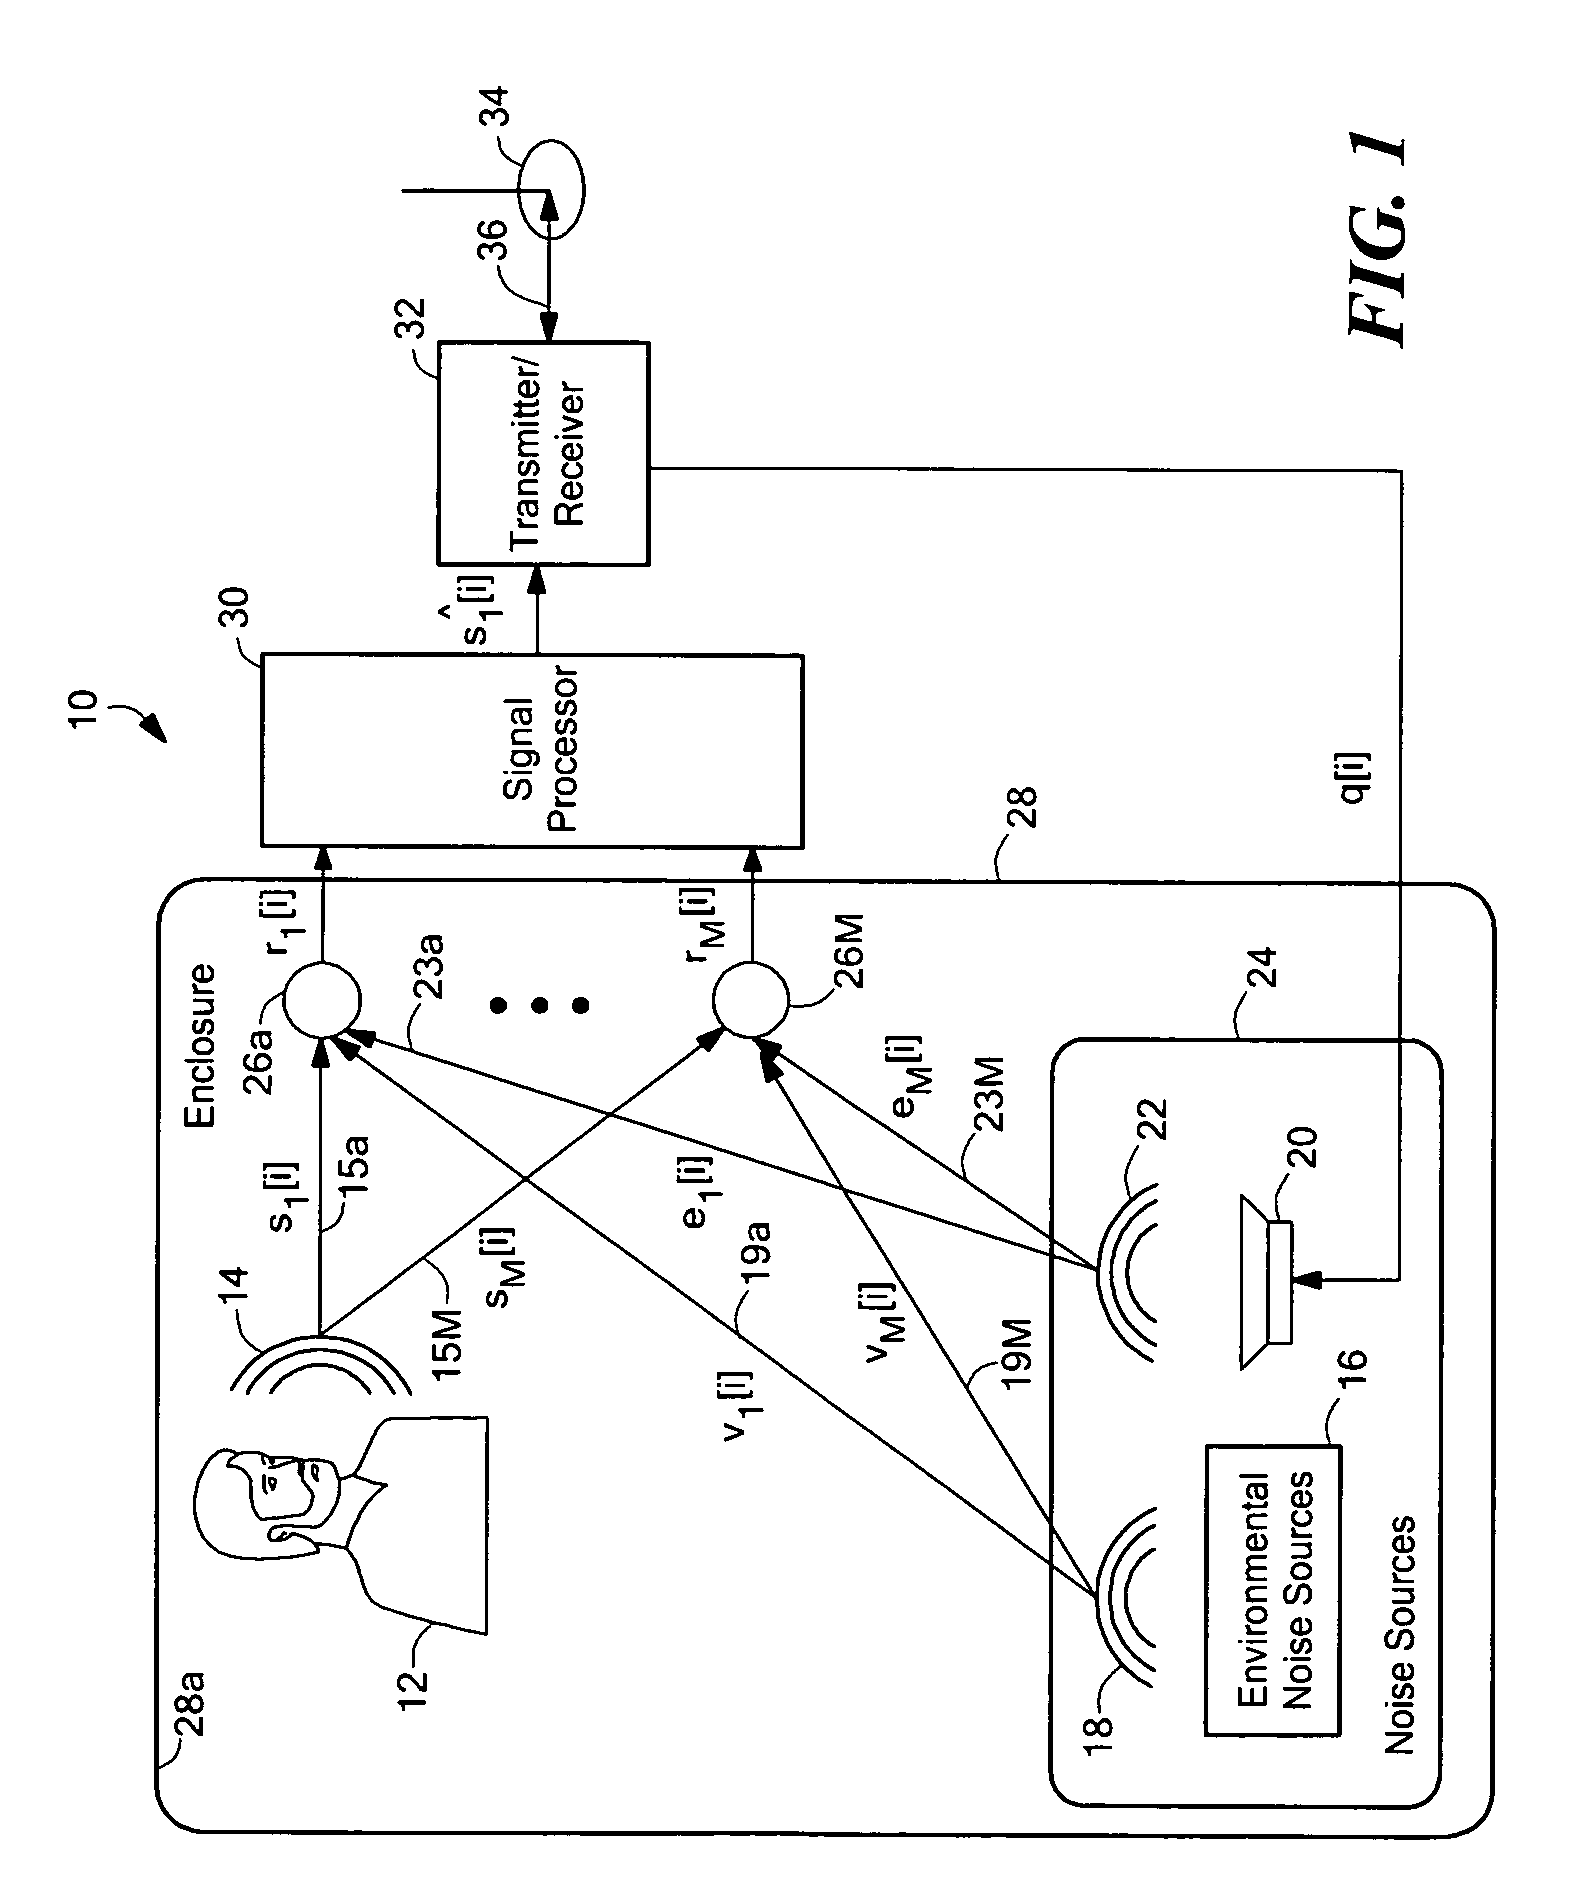 System and method for noise reduction having first and second adaptive filters